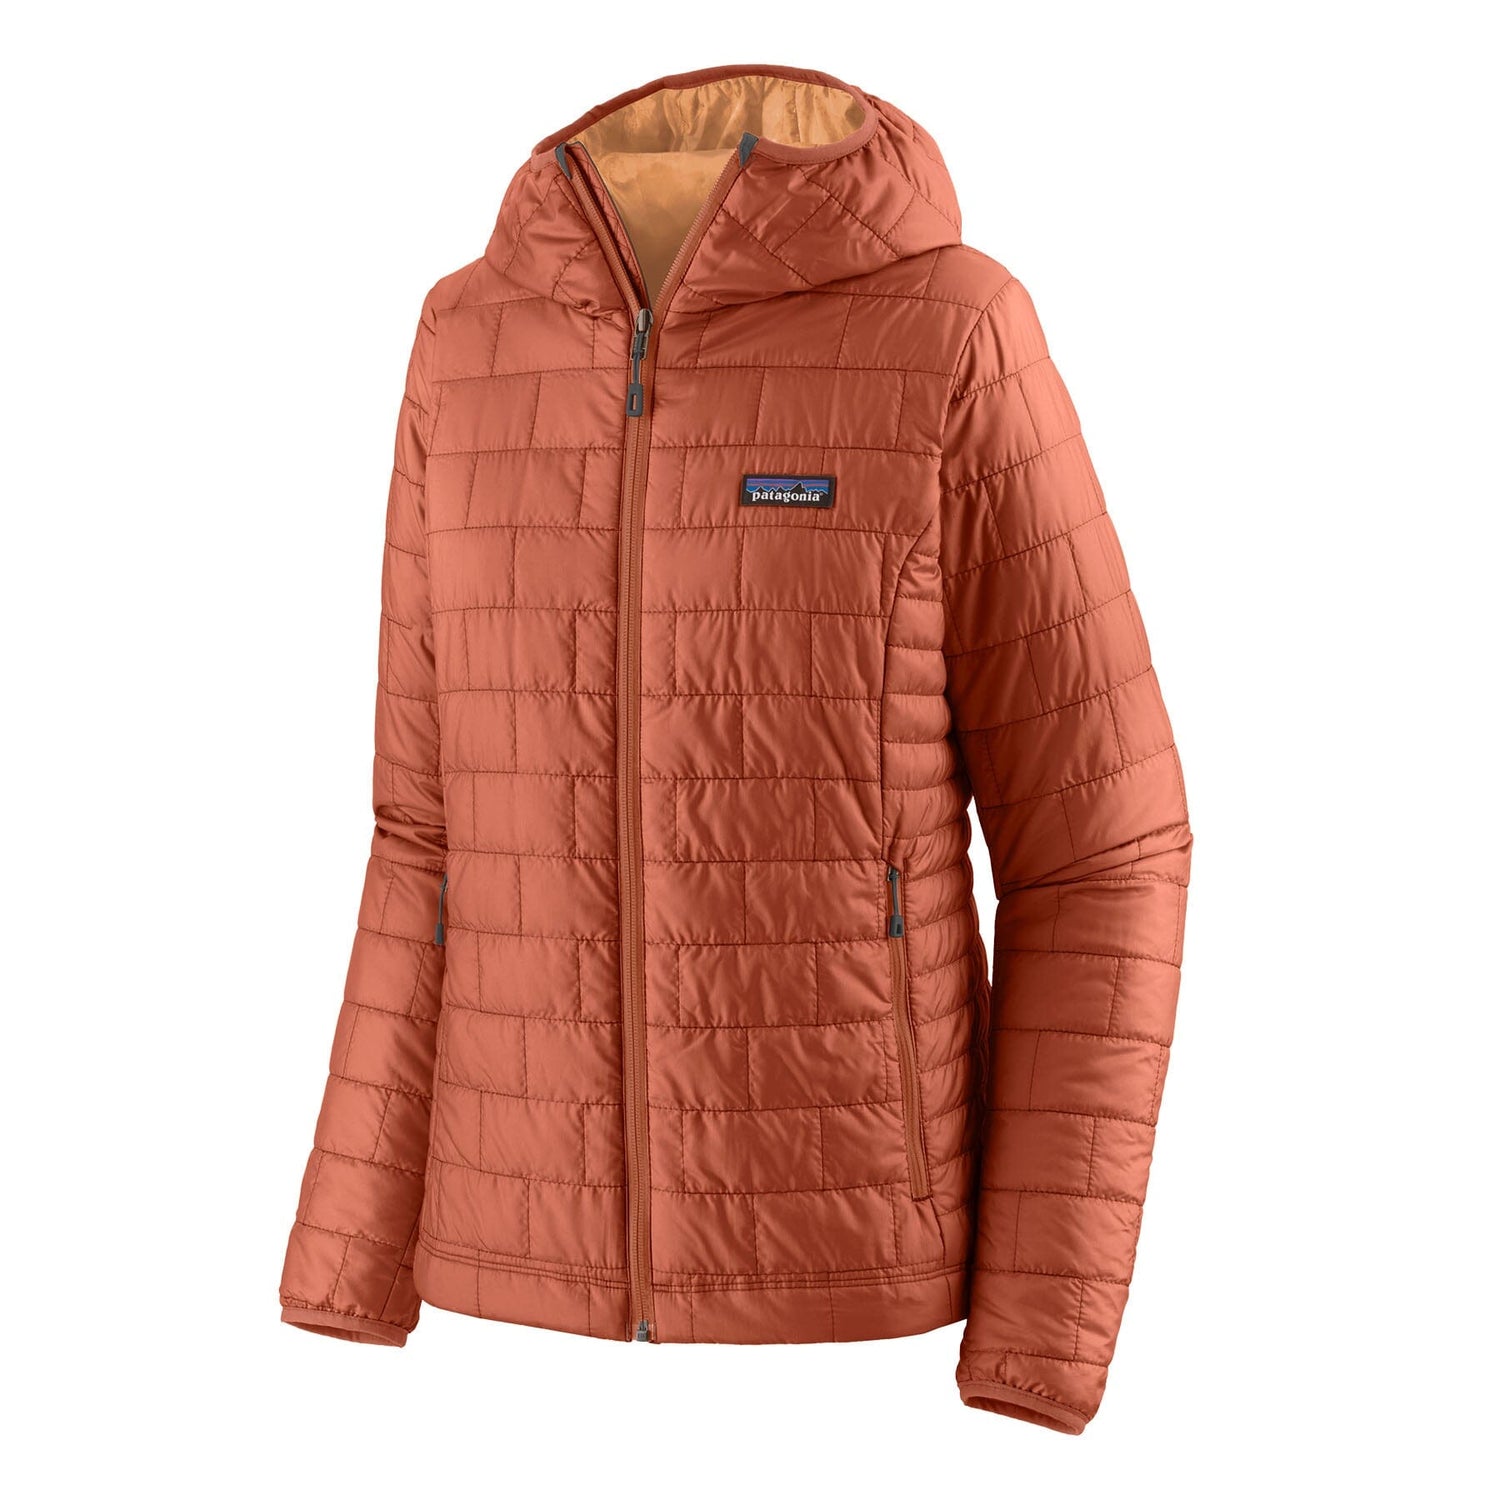 Patagonia W's Nano Puff® Hoody - Recycled Polyester Sienna Clay Jacket